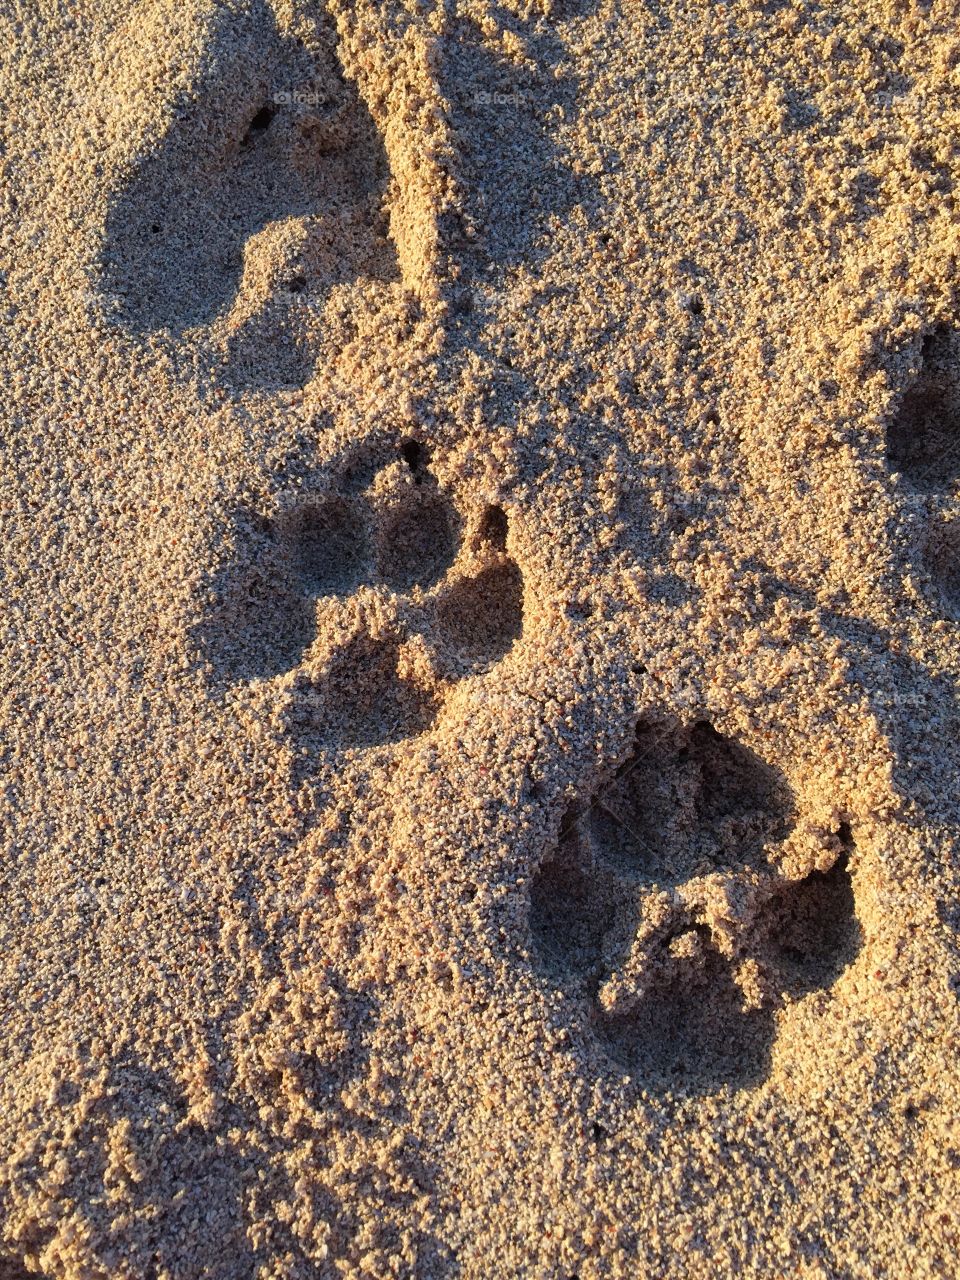 Paw prints in he sand 